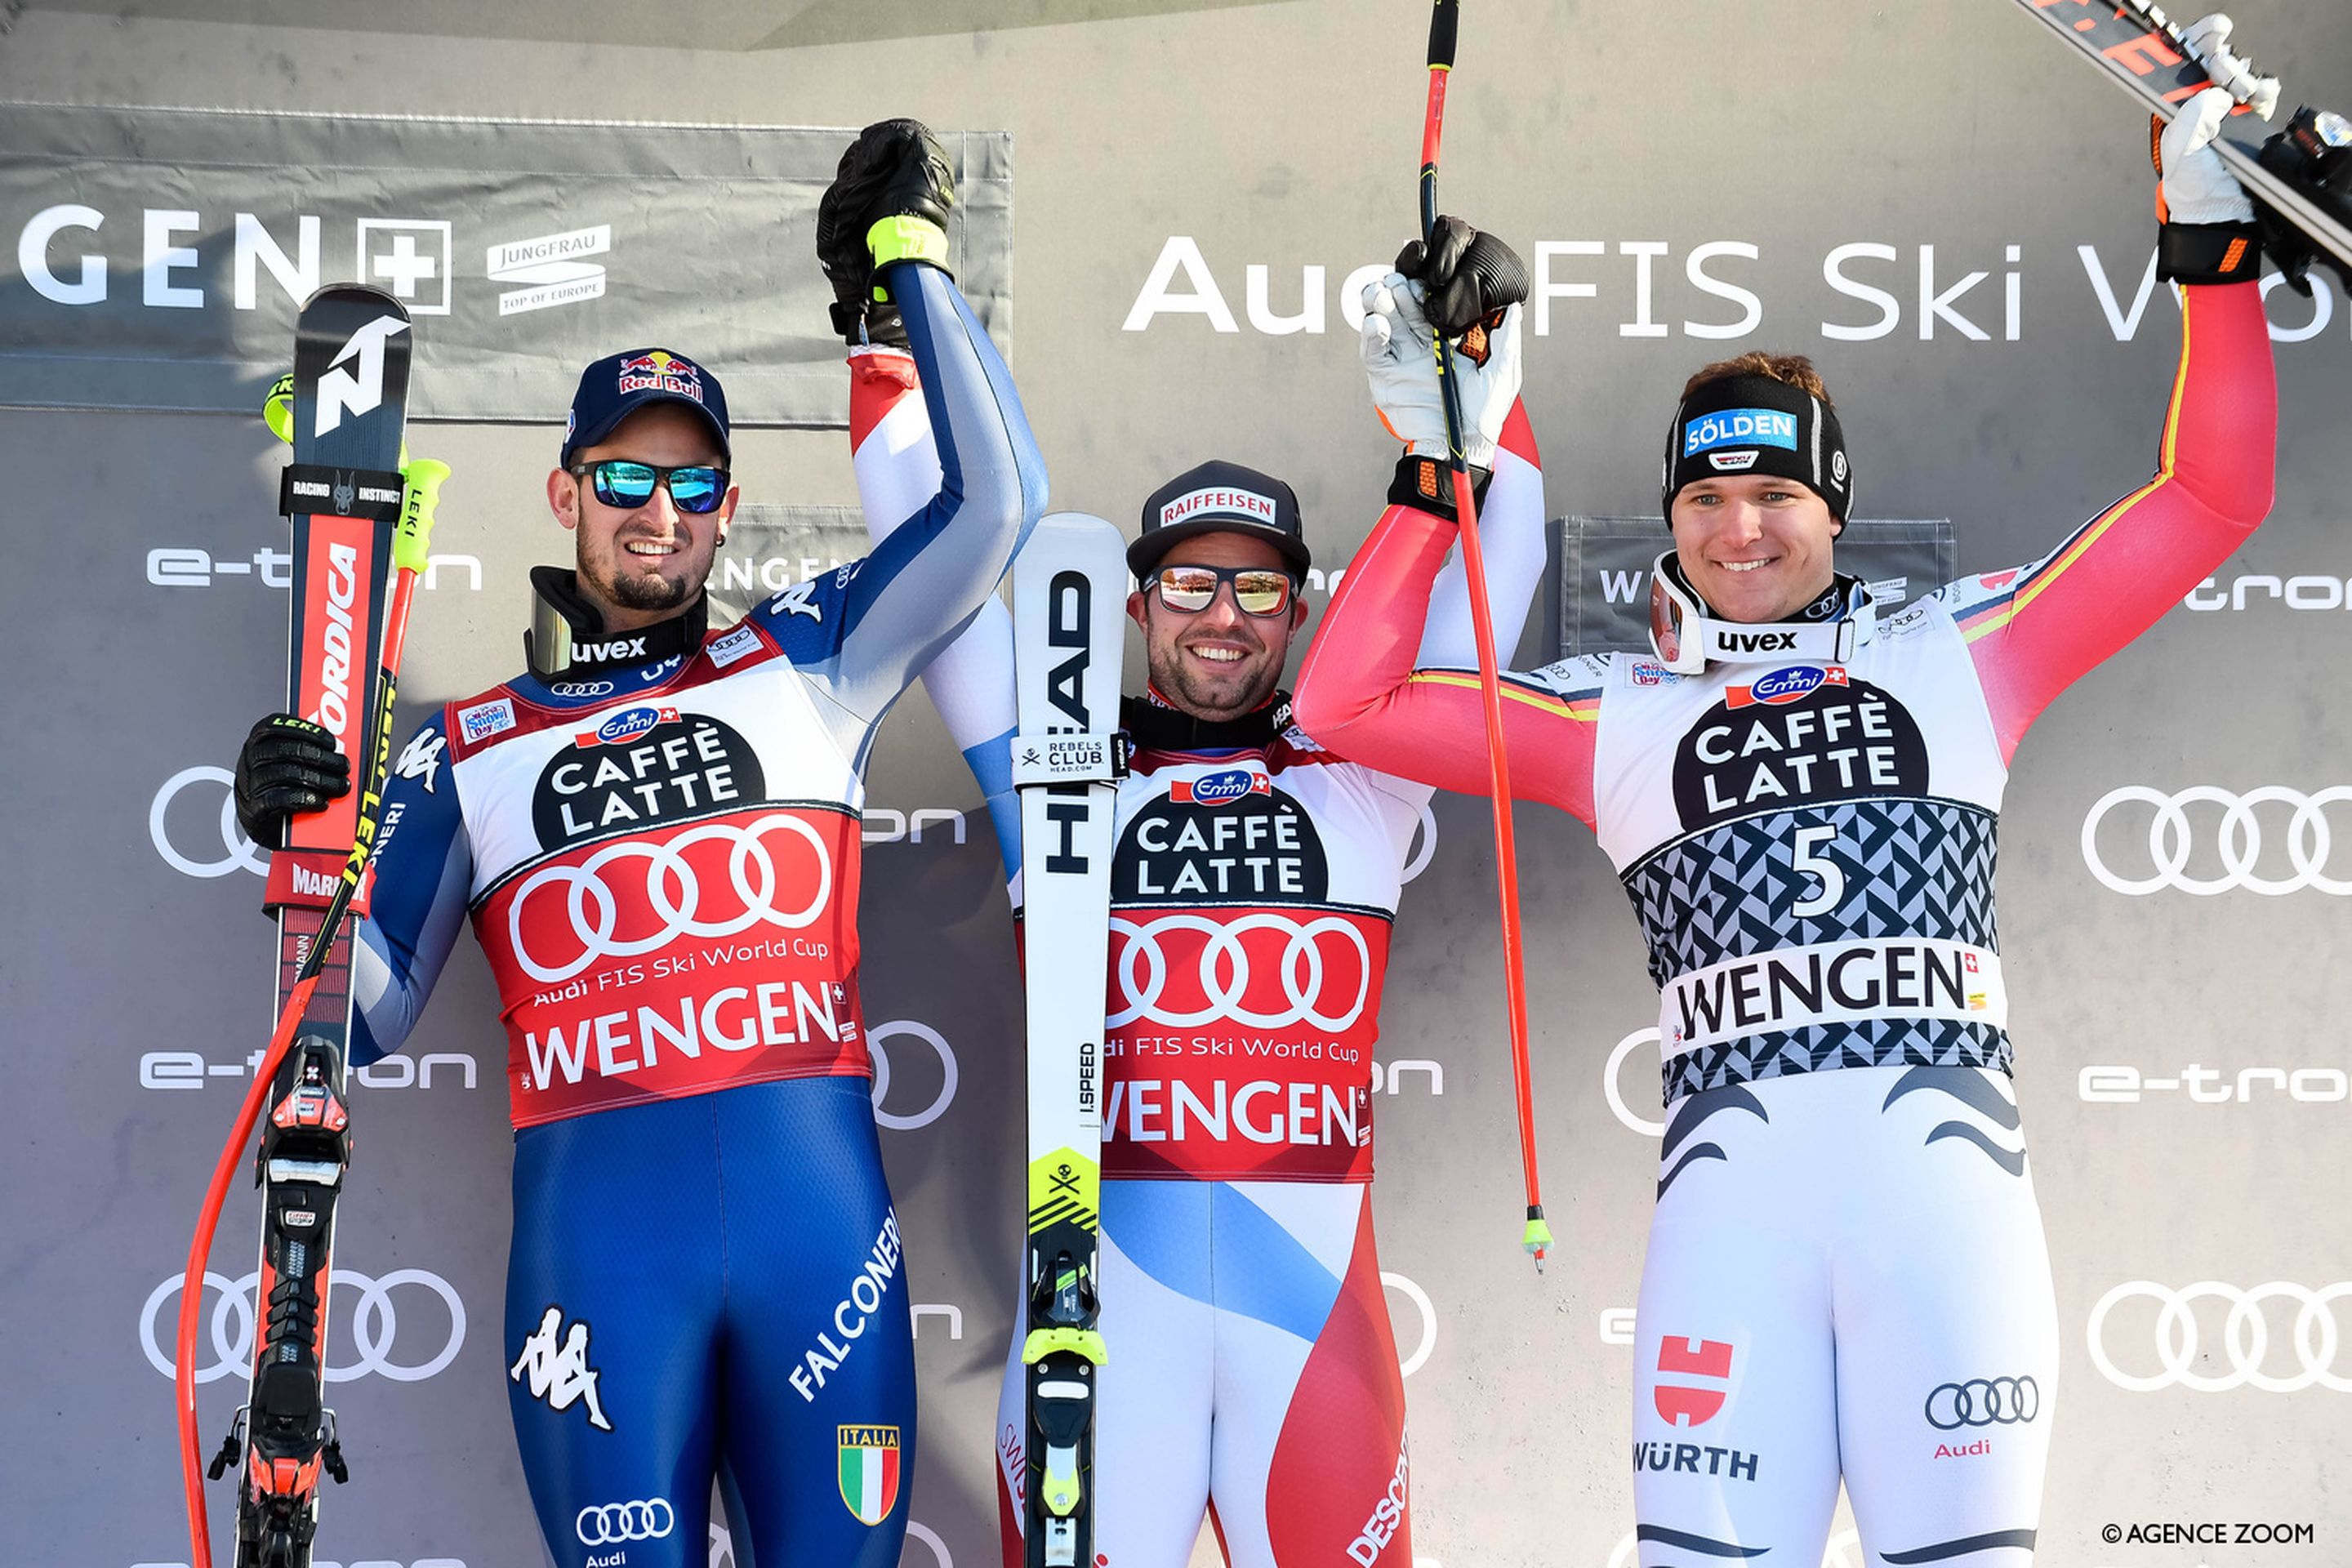 WENGEN, SWITZERLAND - JANUARY 18 : Dominik Paris of Italy takes 2nd place, Beat Feuz of Switzerland takes 1st place, Thomas Dressen of Germany takes 3rd place during the Audi FIS Alpine Ski World Cup Men's Downhill on January 18, 2020 in Wengen Switzerland. (Photo by Alain Grosclaude/Agence Zoom)